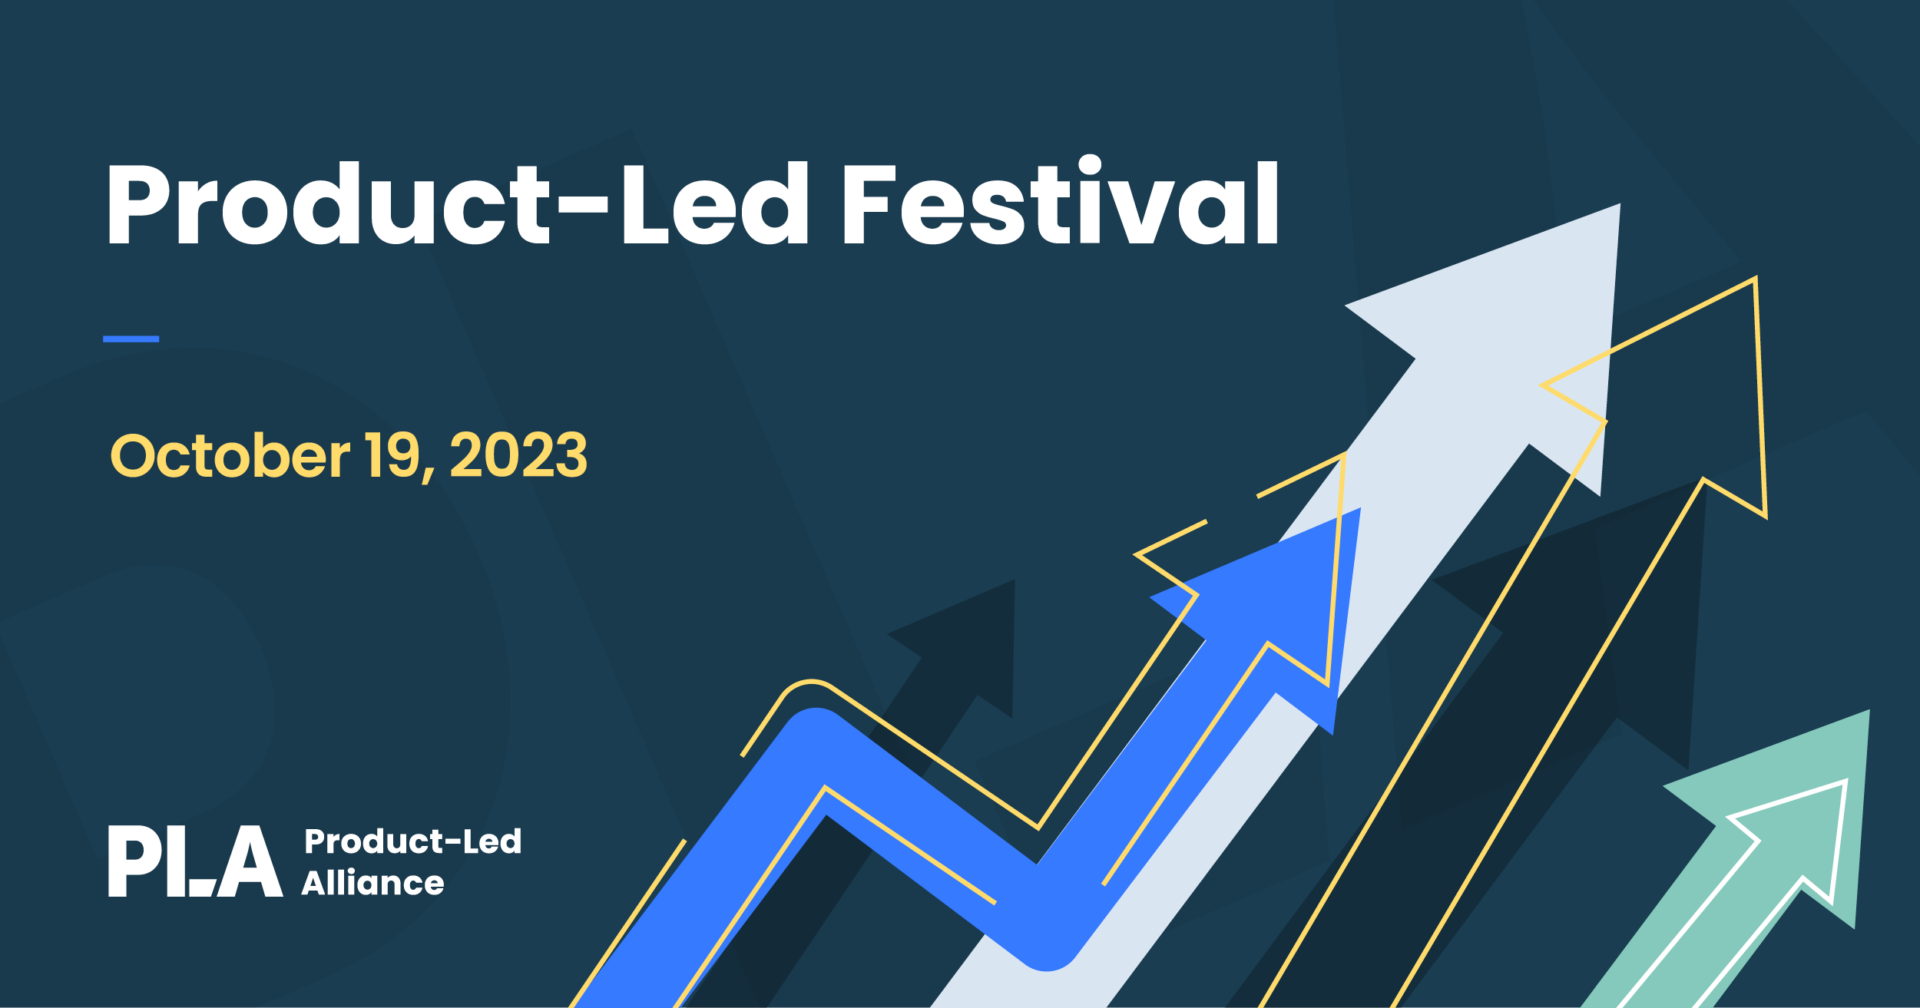 Product-Led Festival, October 19, 2023. Free to attend for all product professionals.